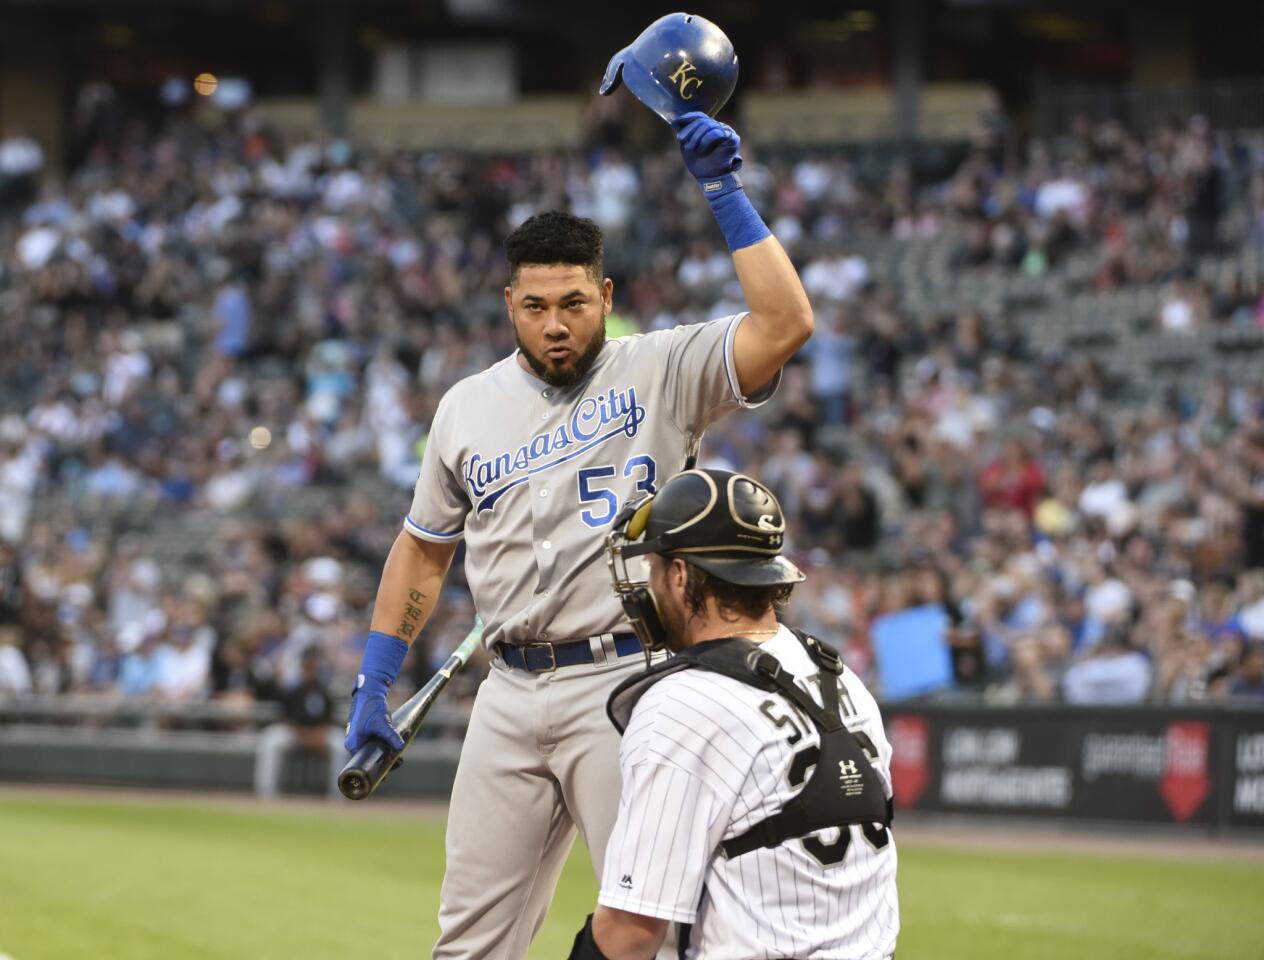 The Royals' Melky Cabrera tips his helmet to fans as he bats against the White Sox during the first inning on Aug. 11, 2017, at Guaranteed Rate Field.